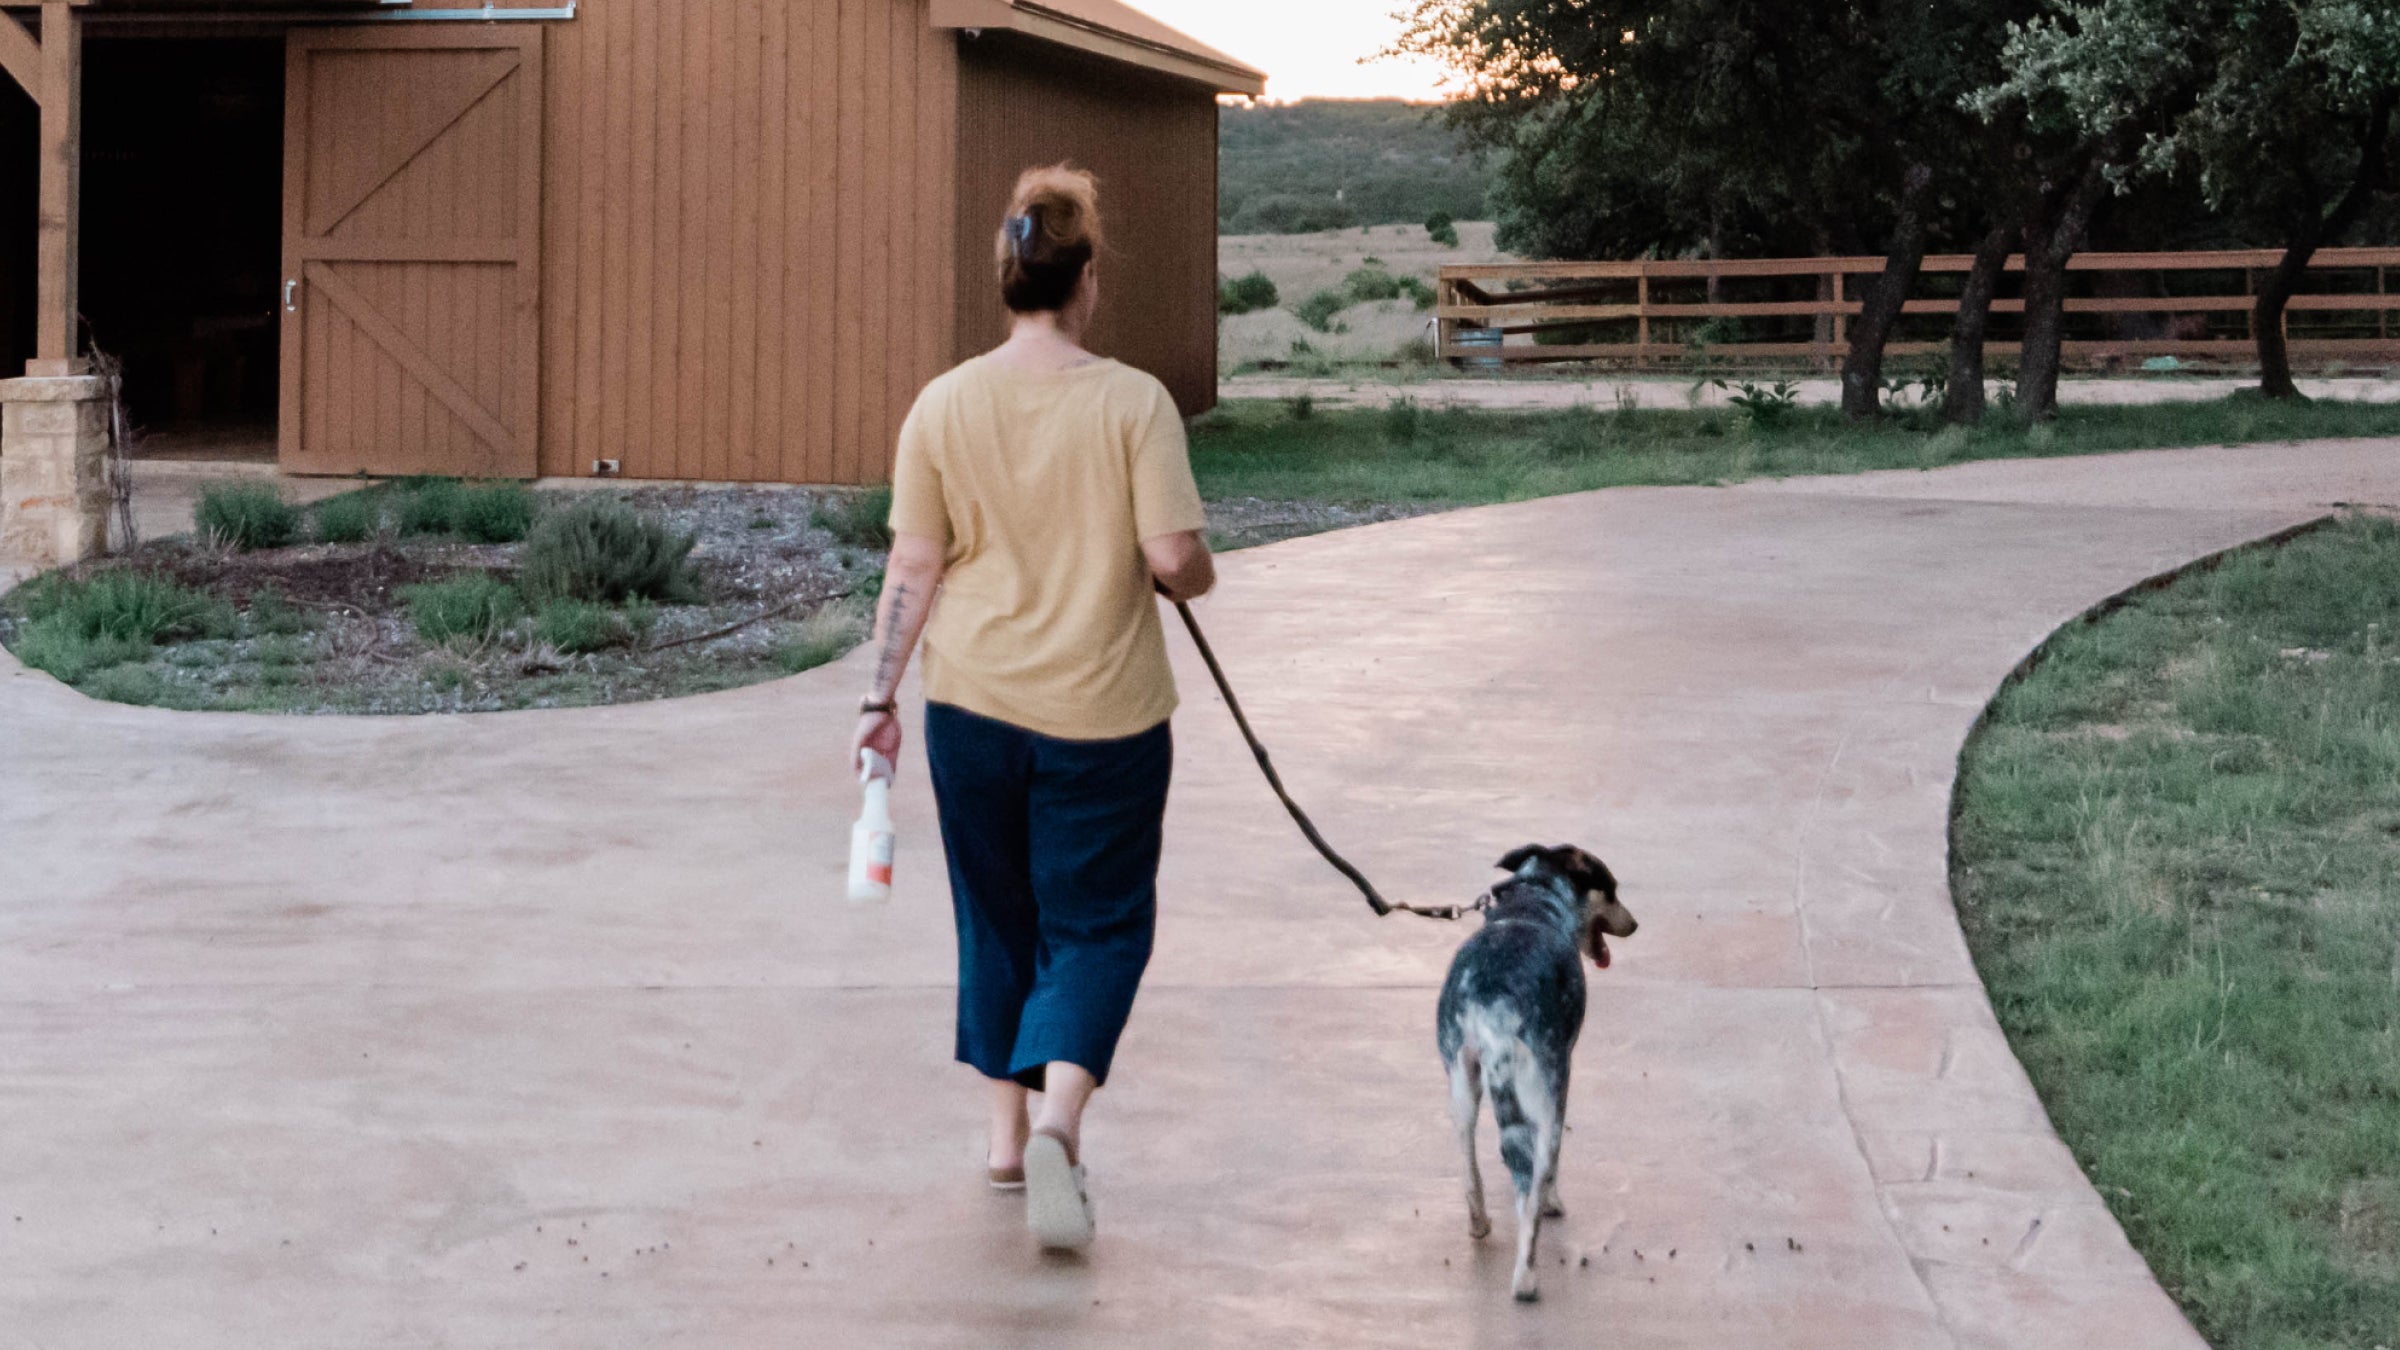 A woman in a tan shirt and blue pants walks her black and white dog on a leash while holding a bottle of Wondercide peppermint Flea & Tick spray